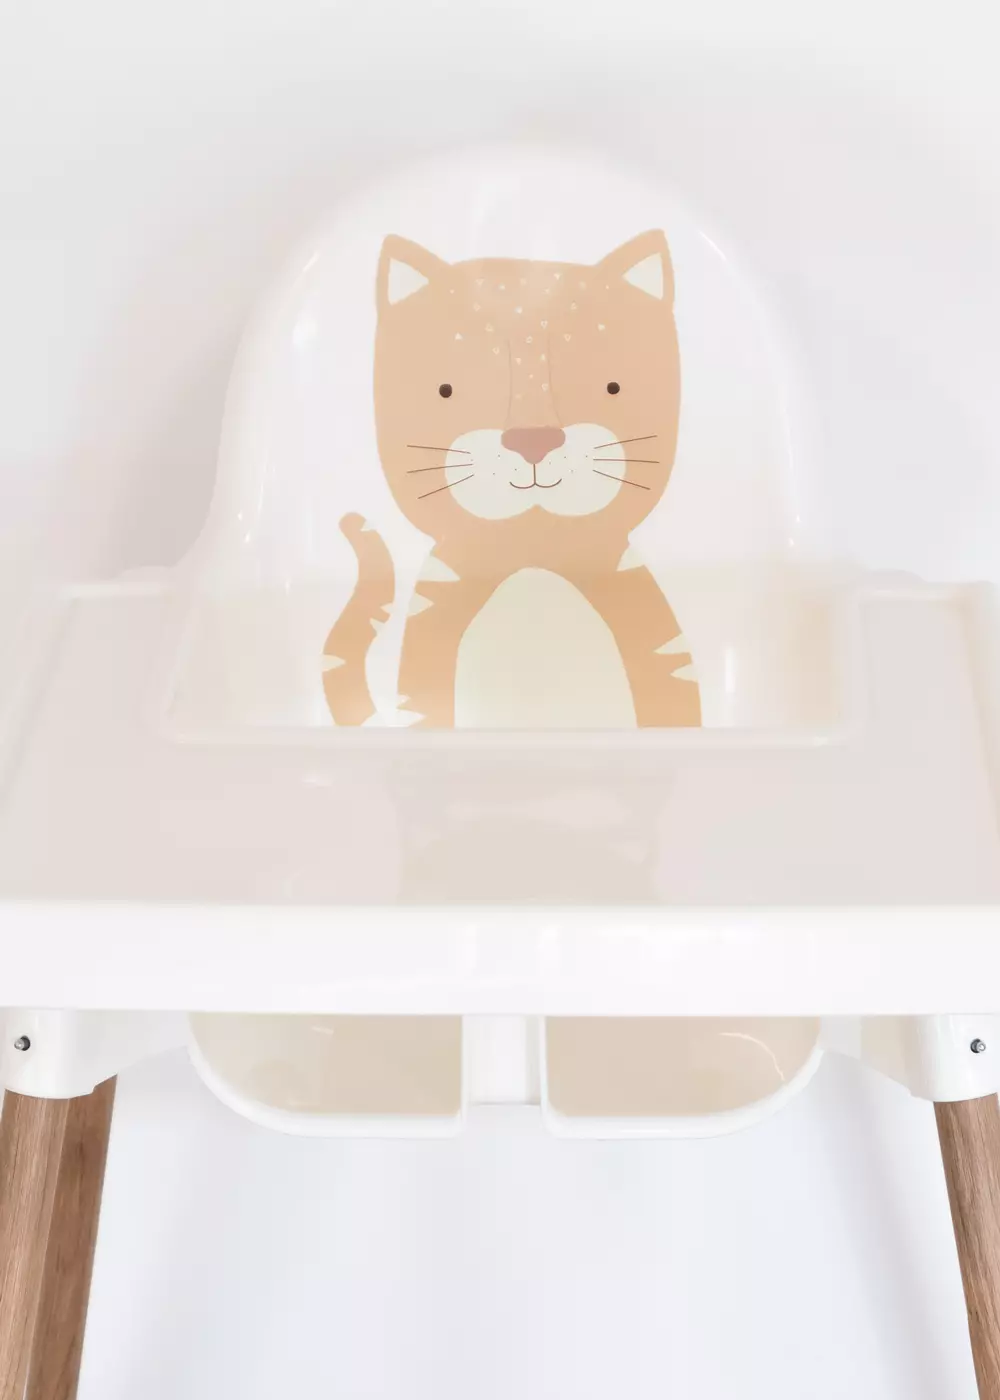  Decal for IKEA ANTILOP highchair with animal motif cat self-adhesive Ikea accessories